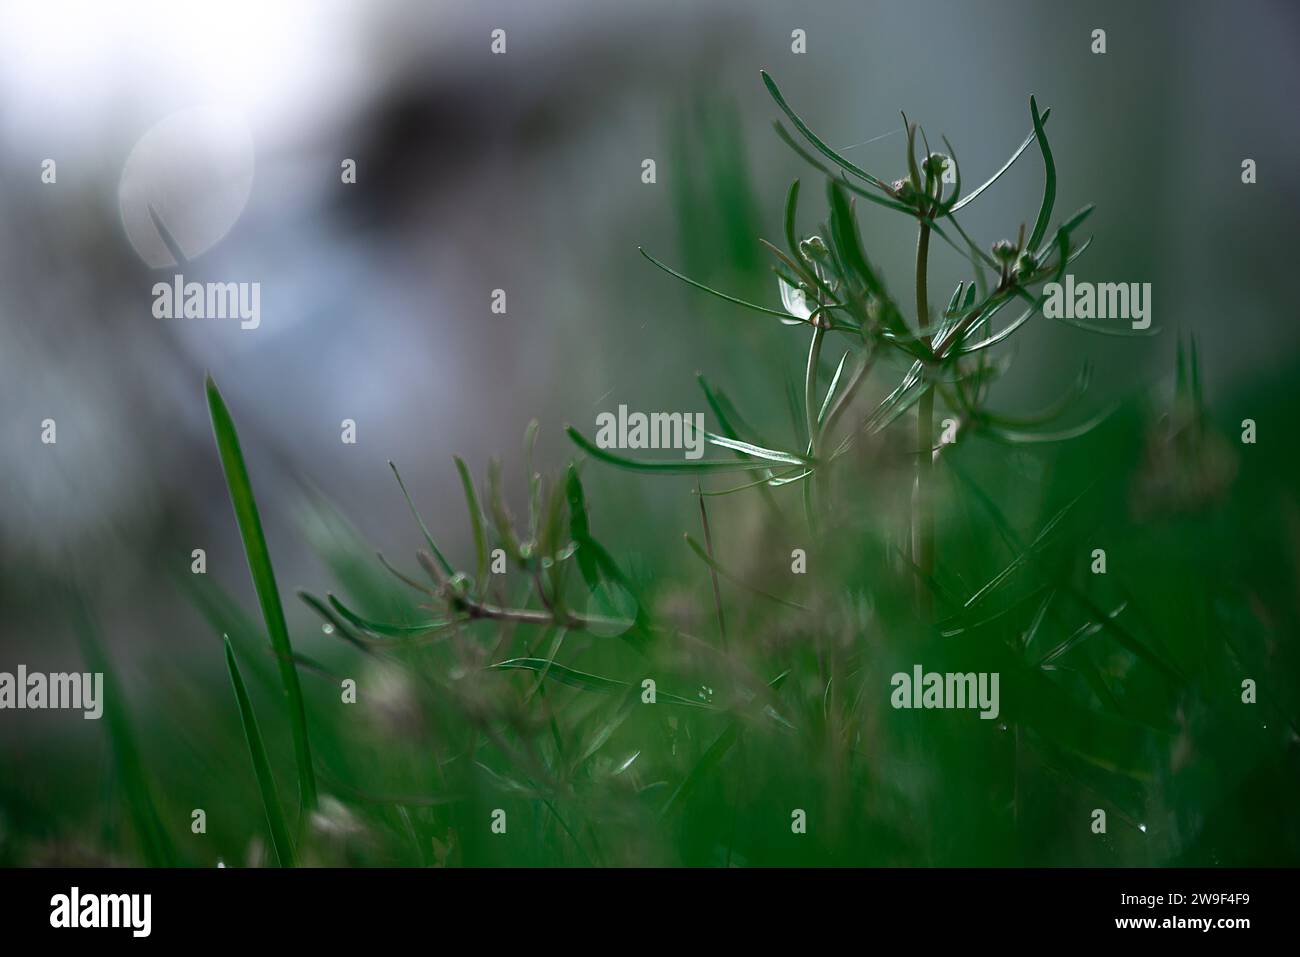 A wild plant in its natural habitat, growing in a lush green grassy field Stock Photo